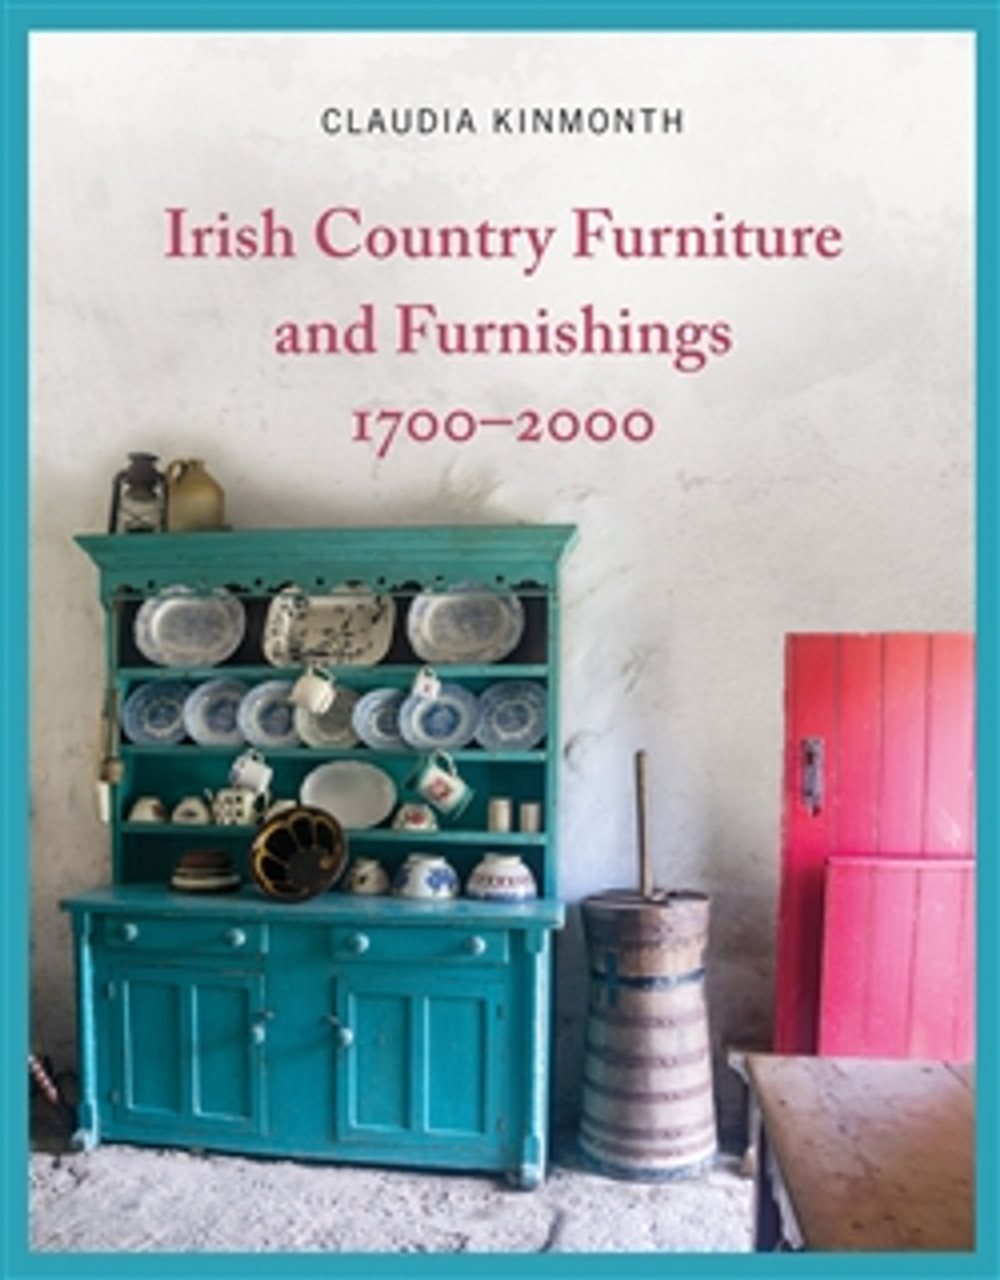 Claudia Kinmonth - Irish Country Furniture & Furnishings 1700-2000- SIGNED HB 1st Edition - 2020 - BRAND NEW